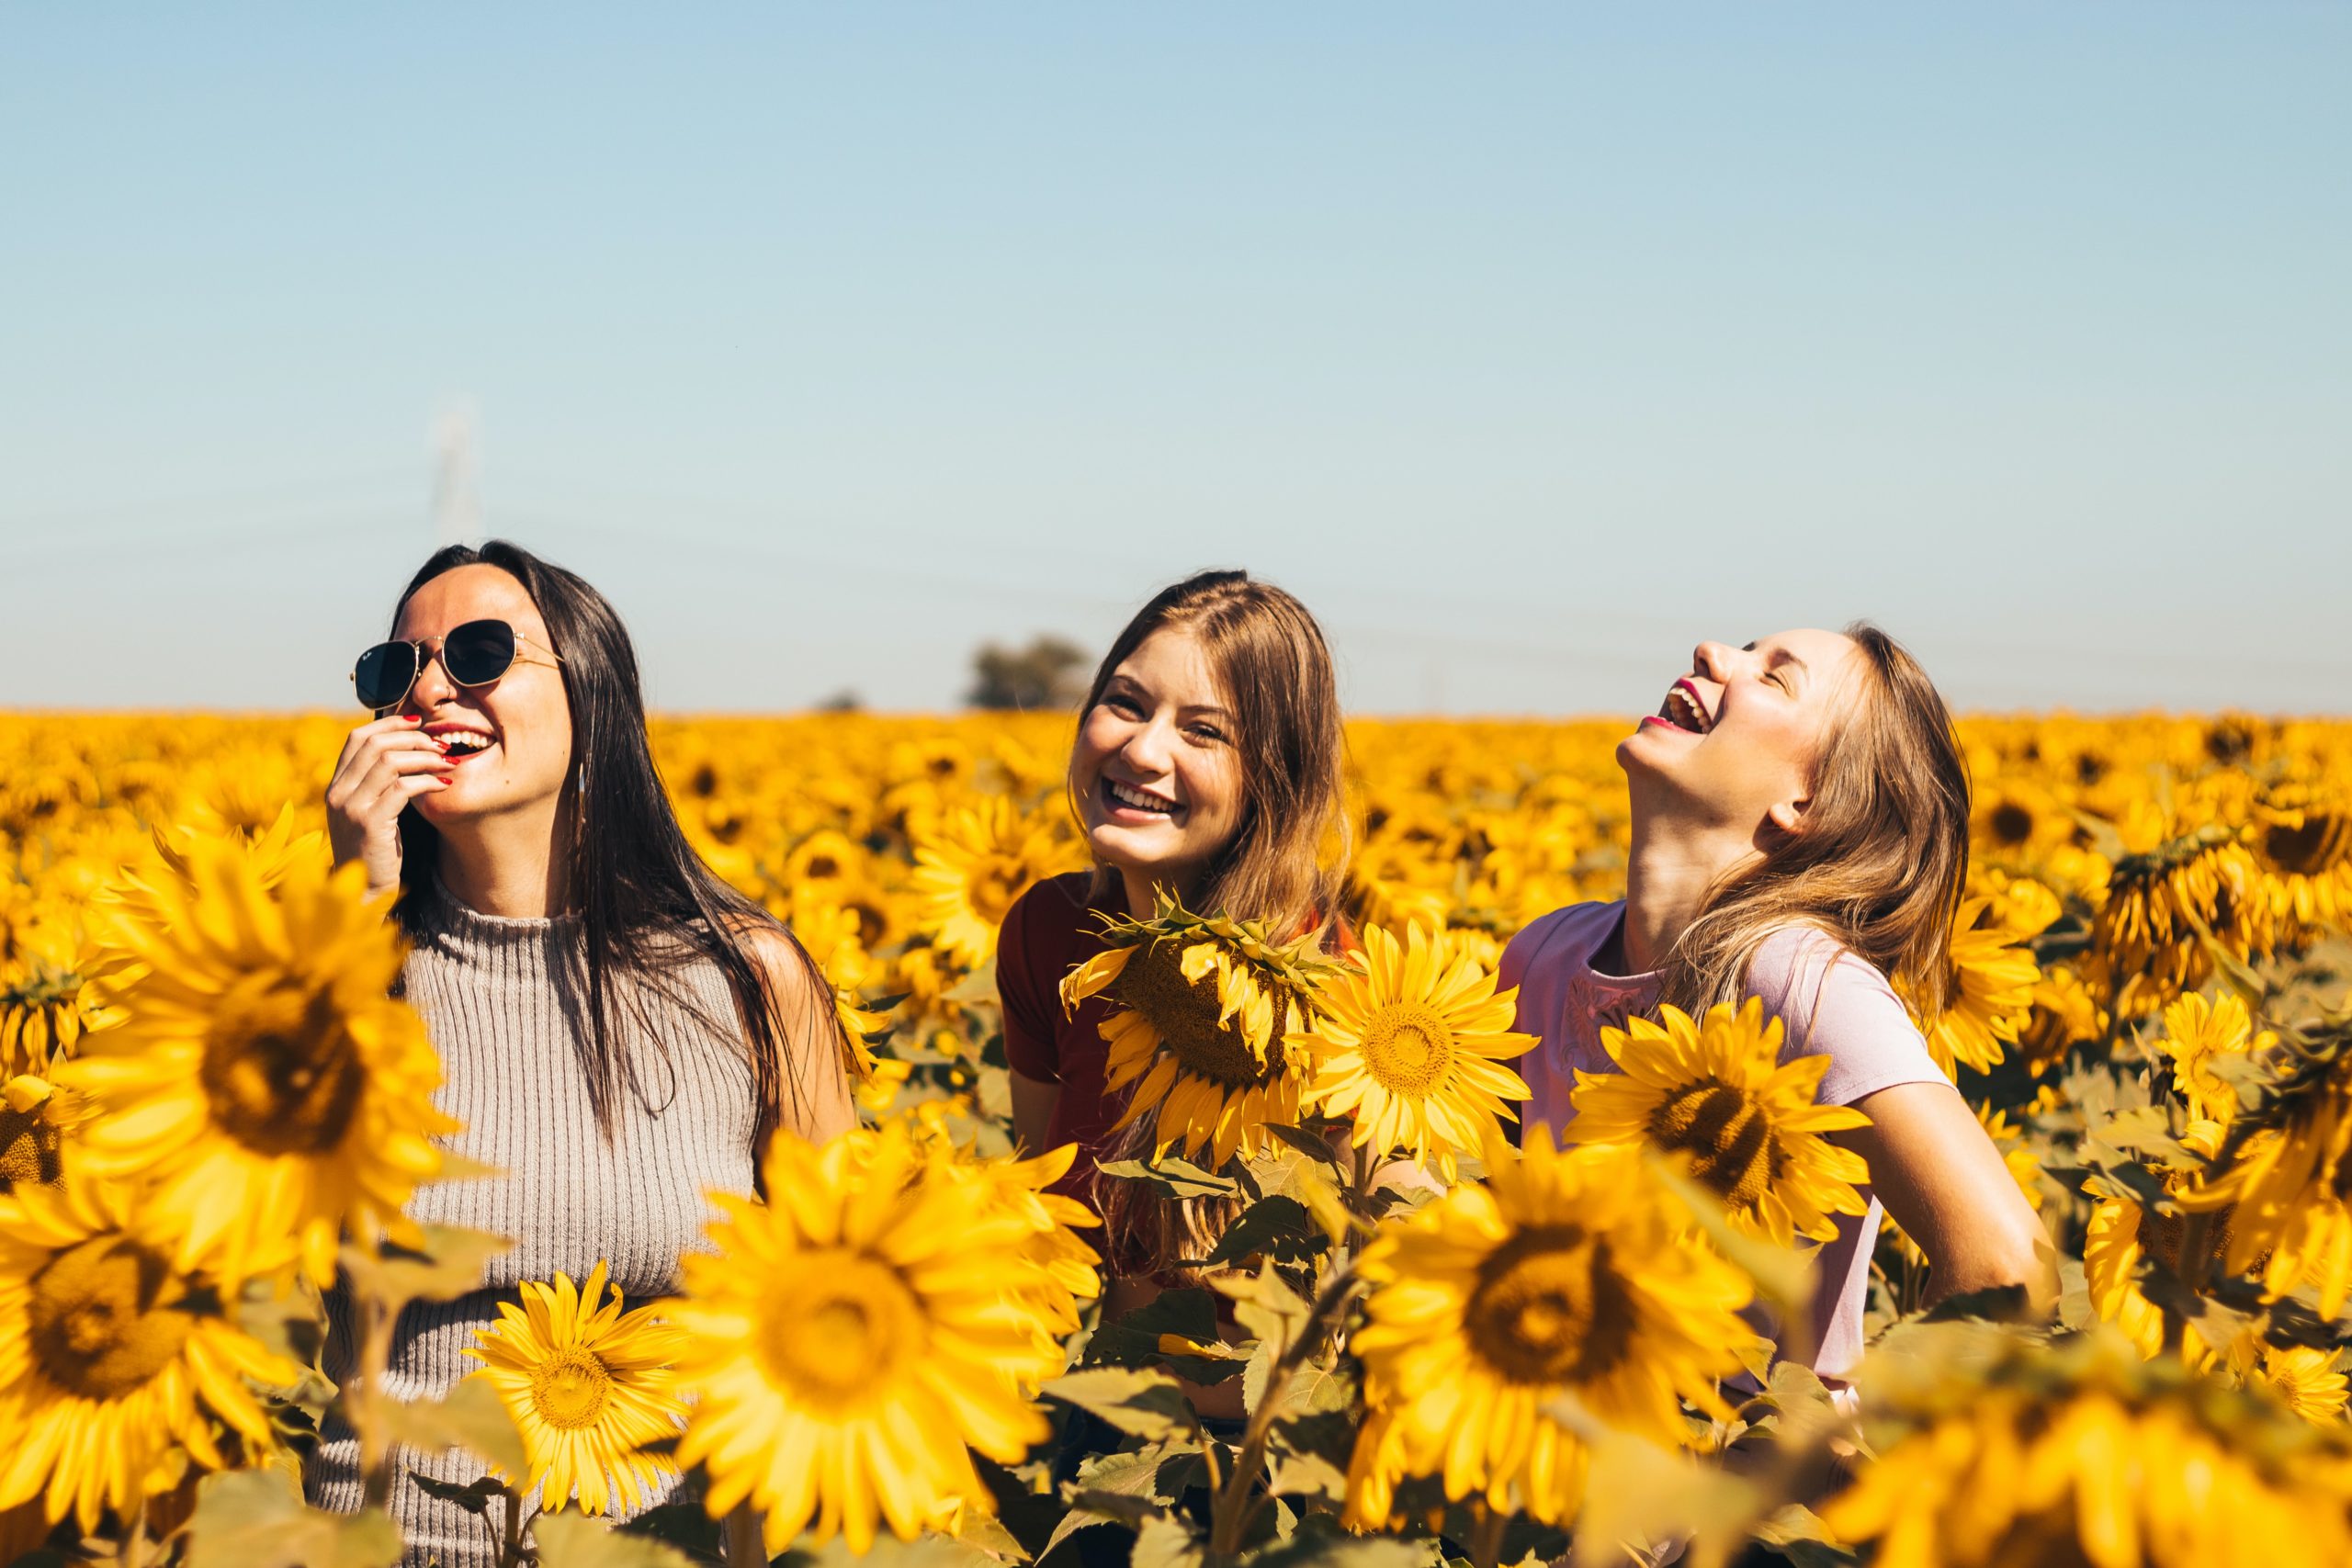 Three women smiling as they stand among a field of sunflowers.